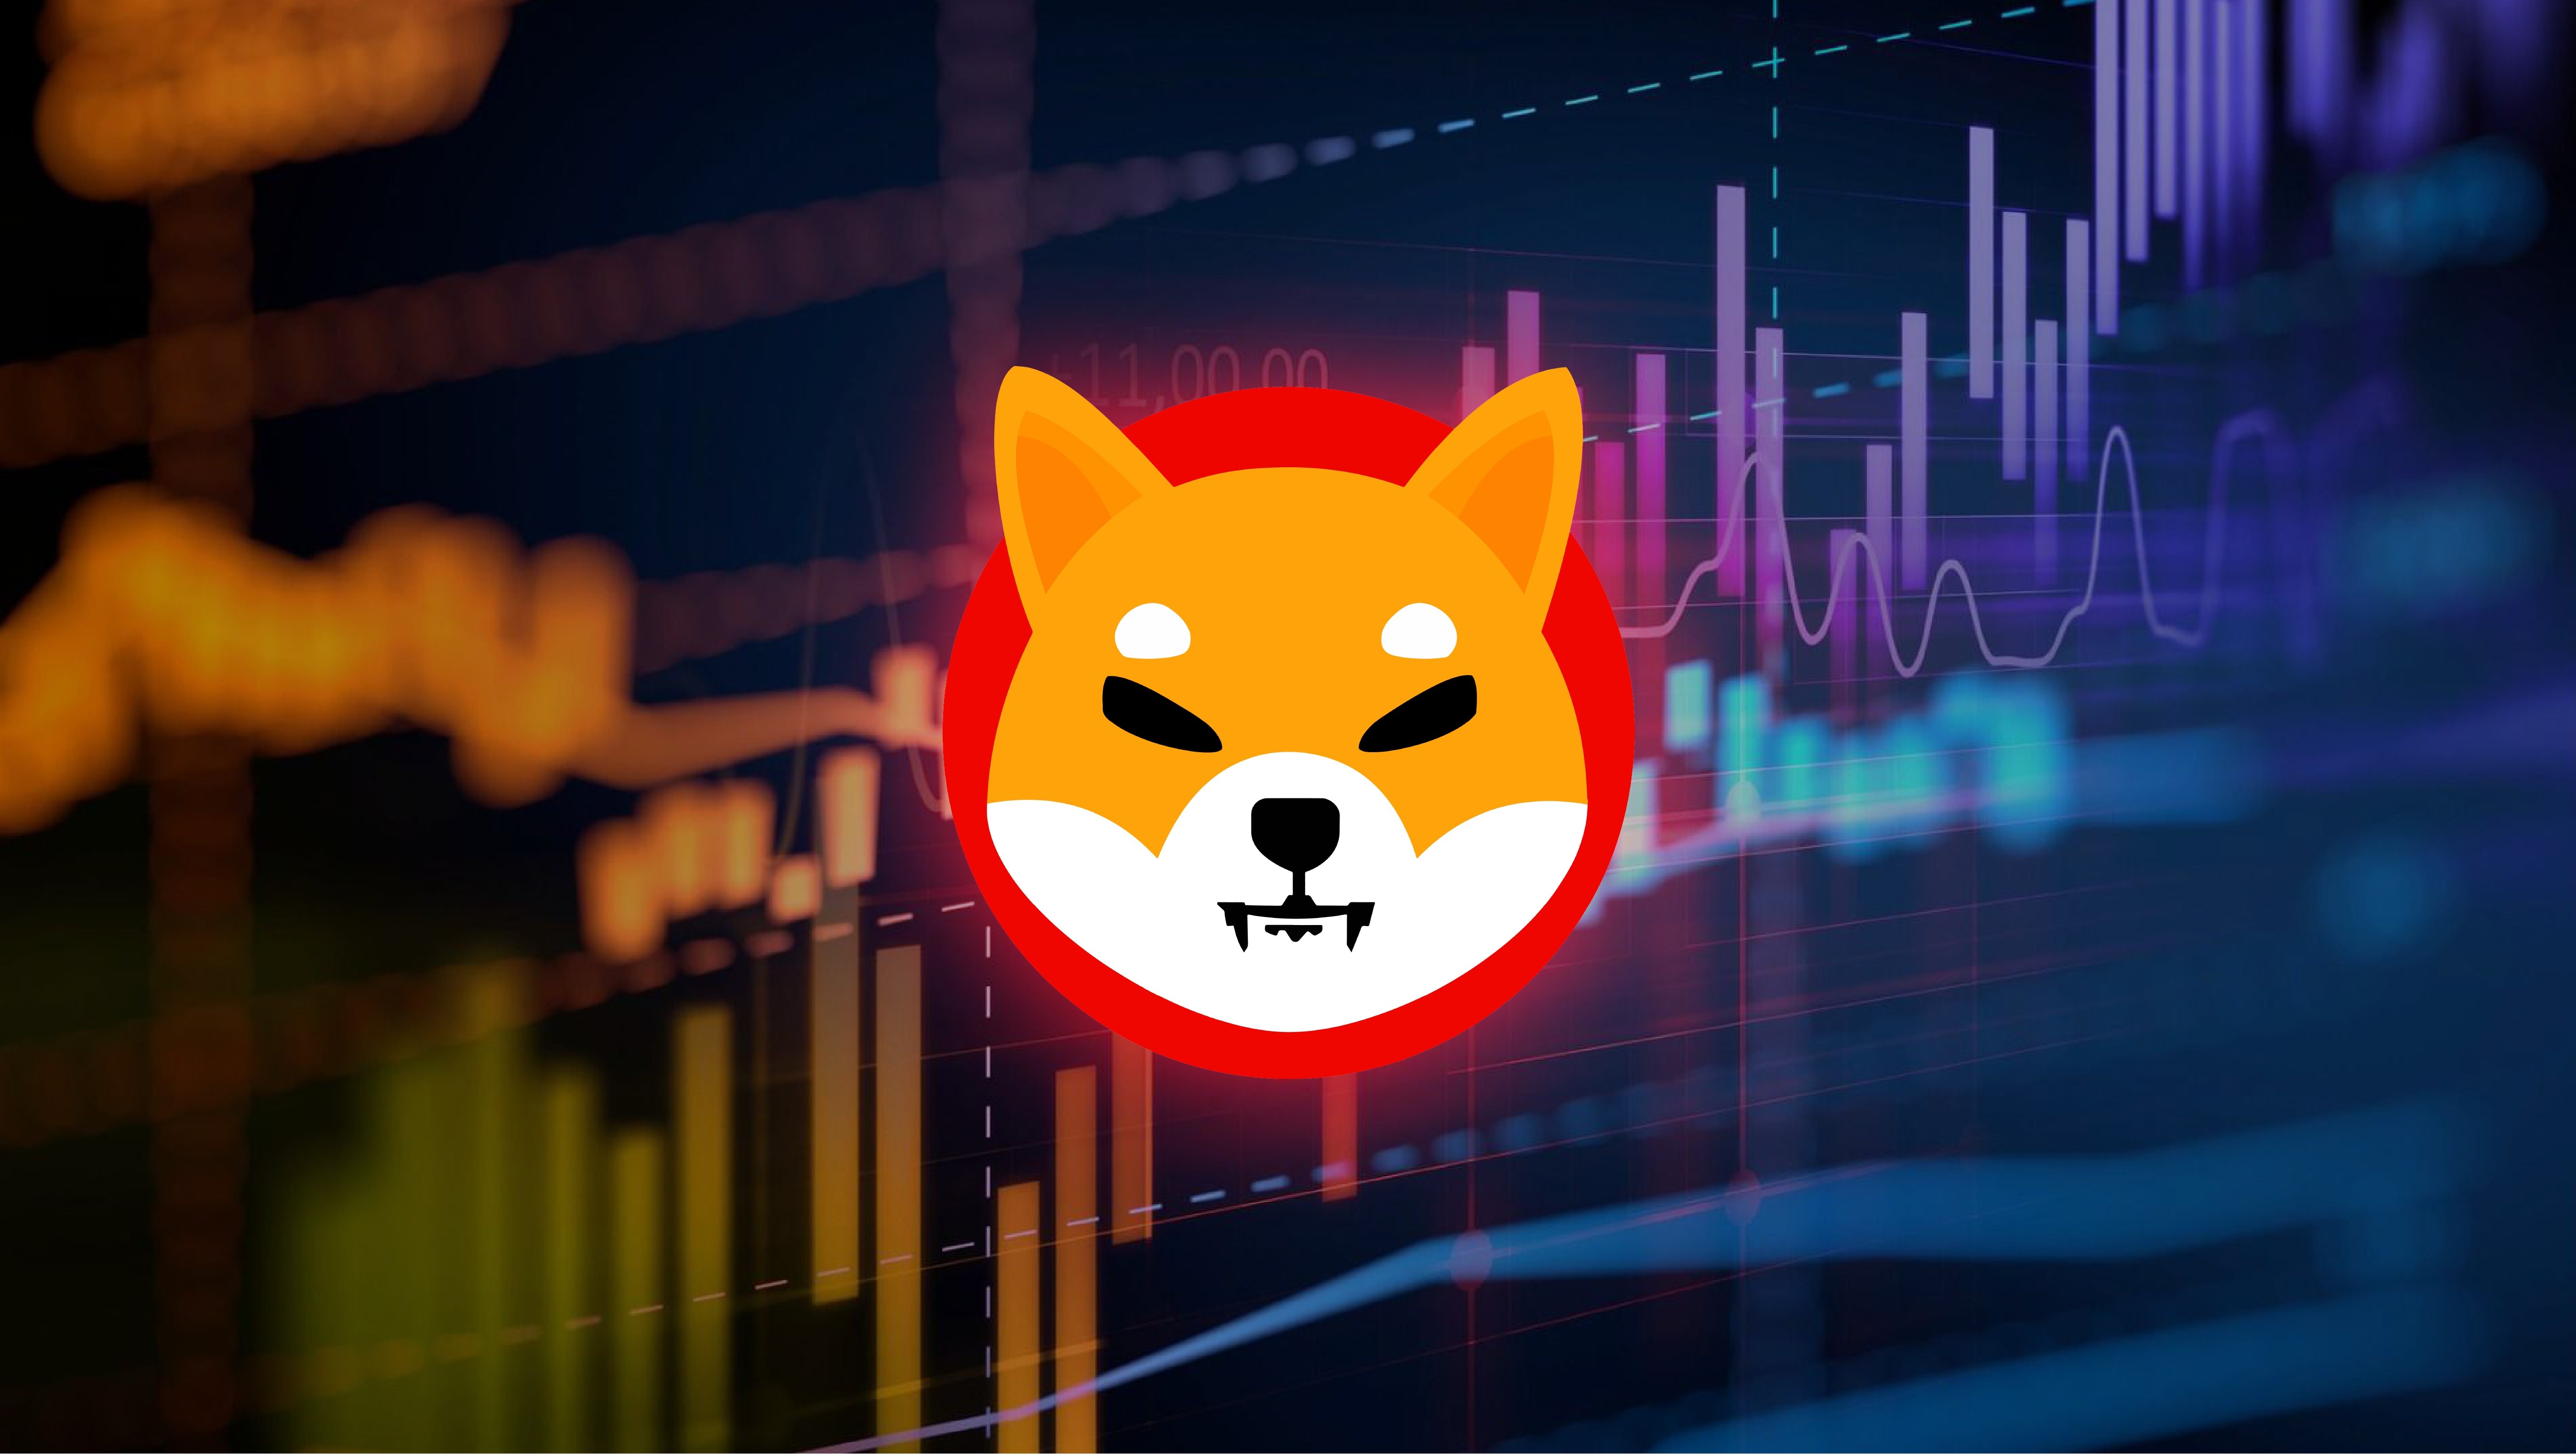 Shiba Inu Underbought, While Bitcoin Overbought Recently: Santiment